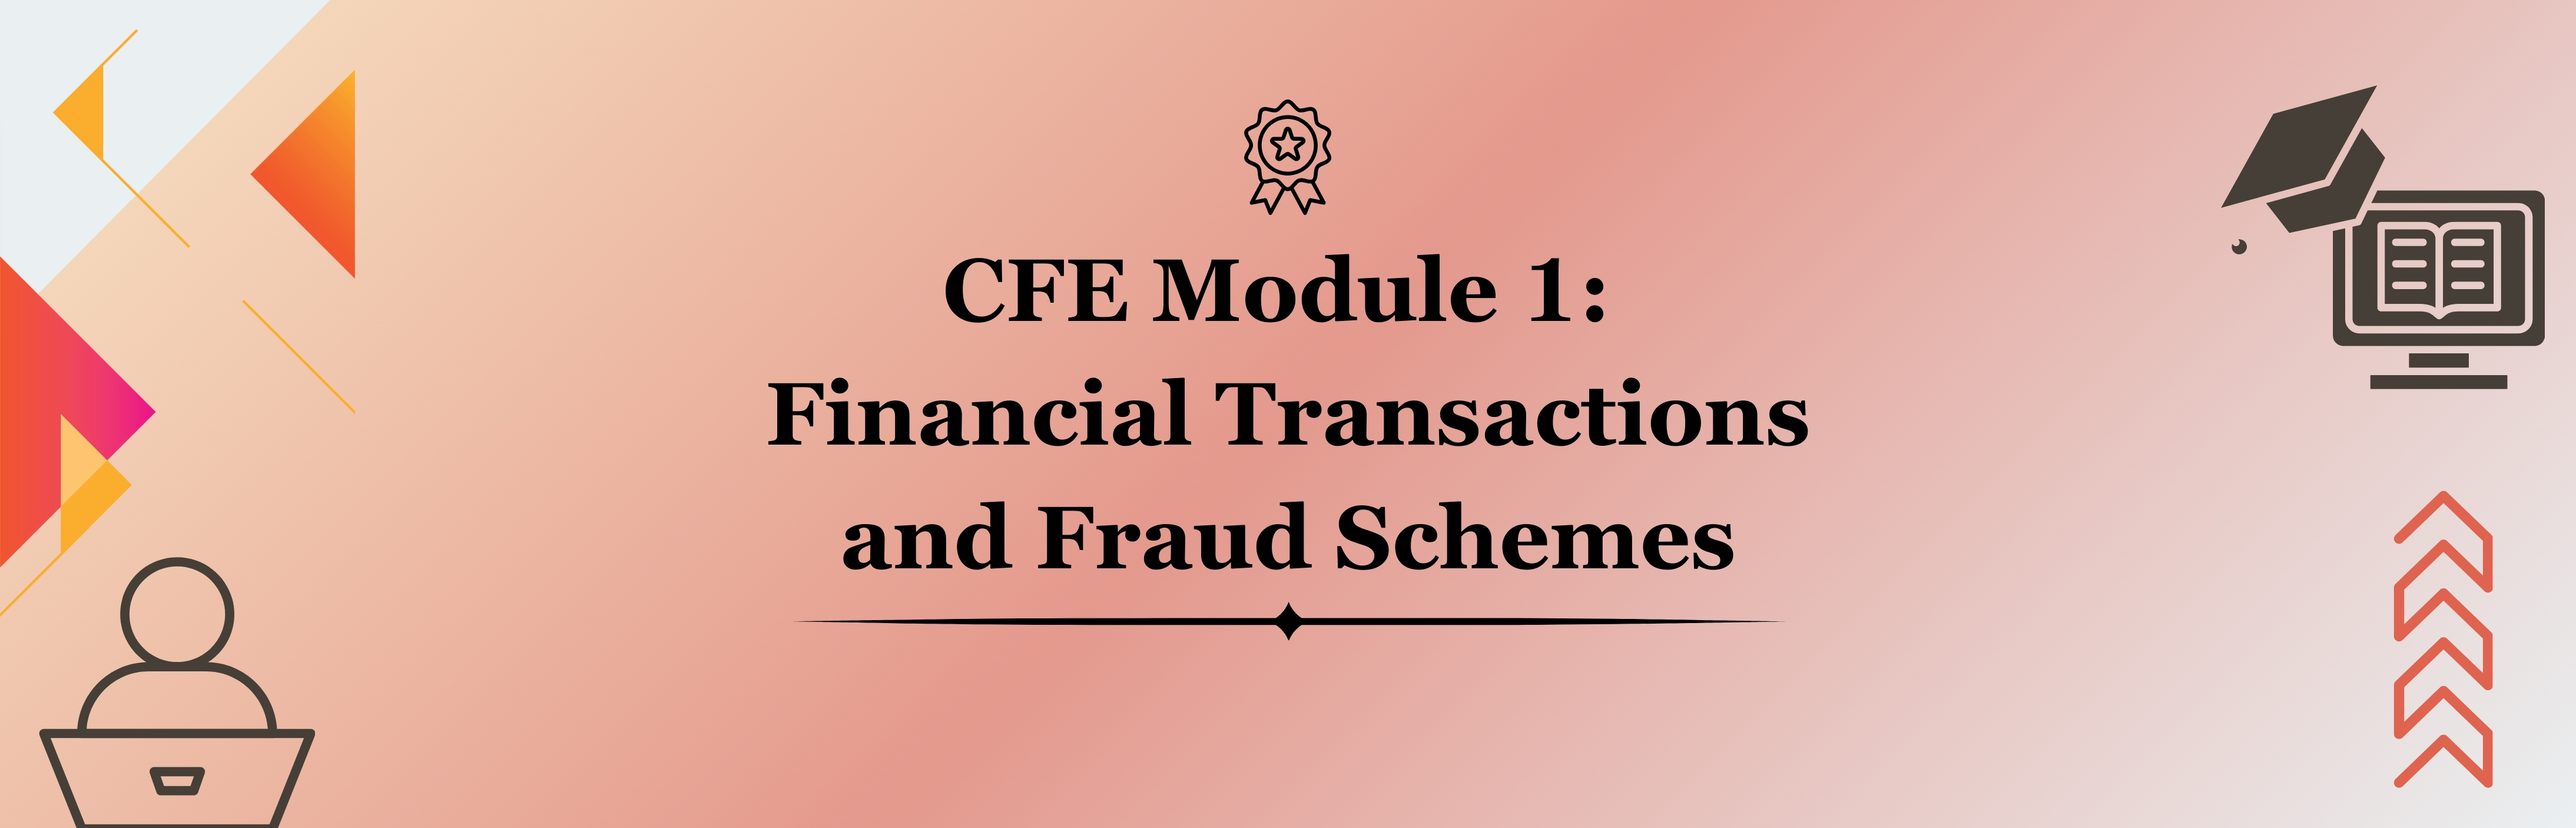 CFE Module 1: Financial Transactions and Fraud Schemes